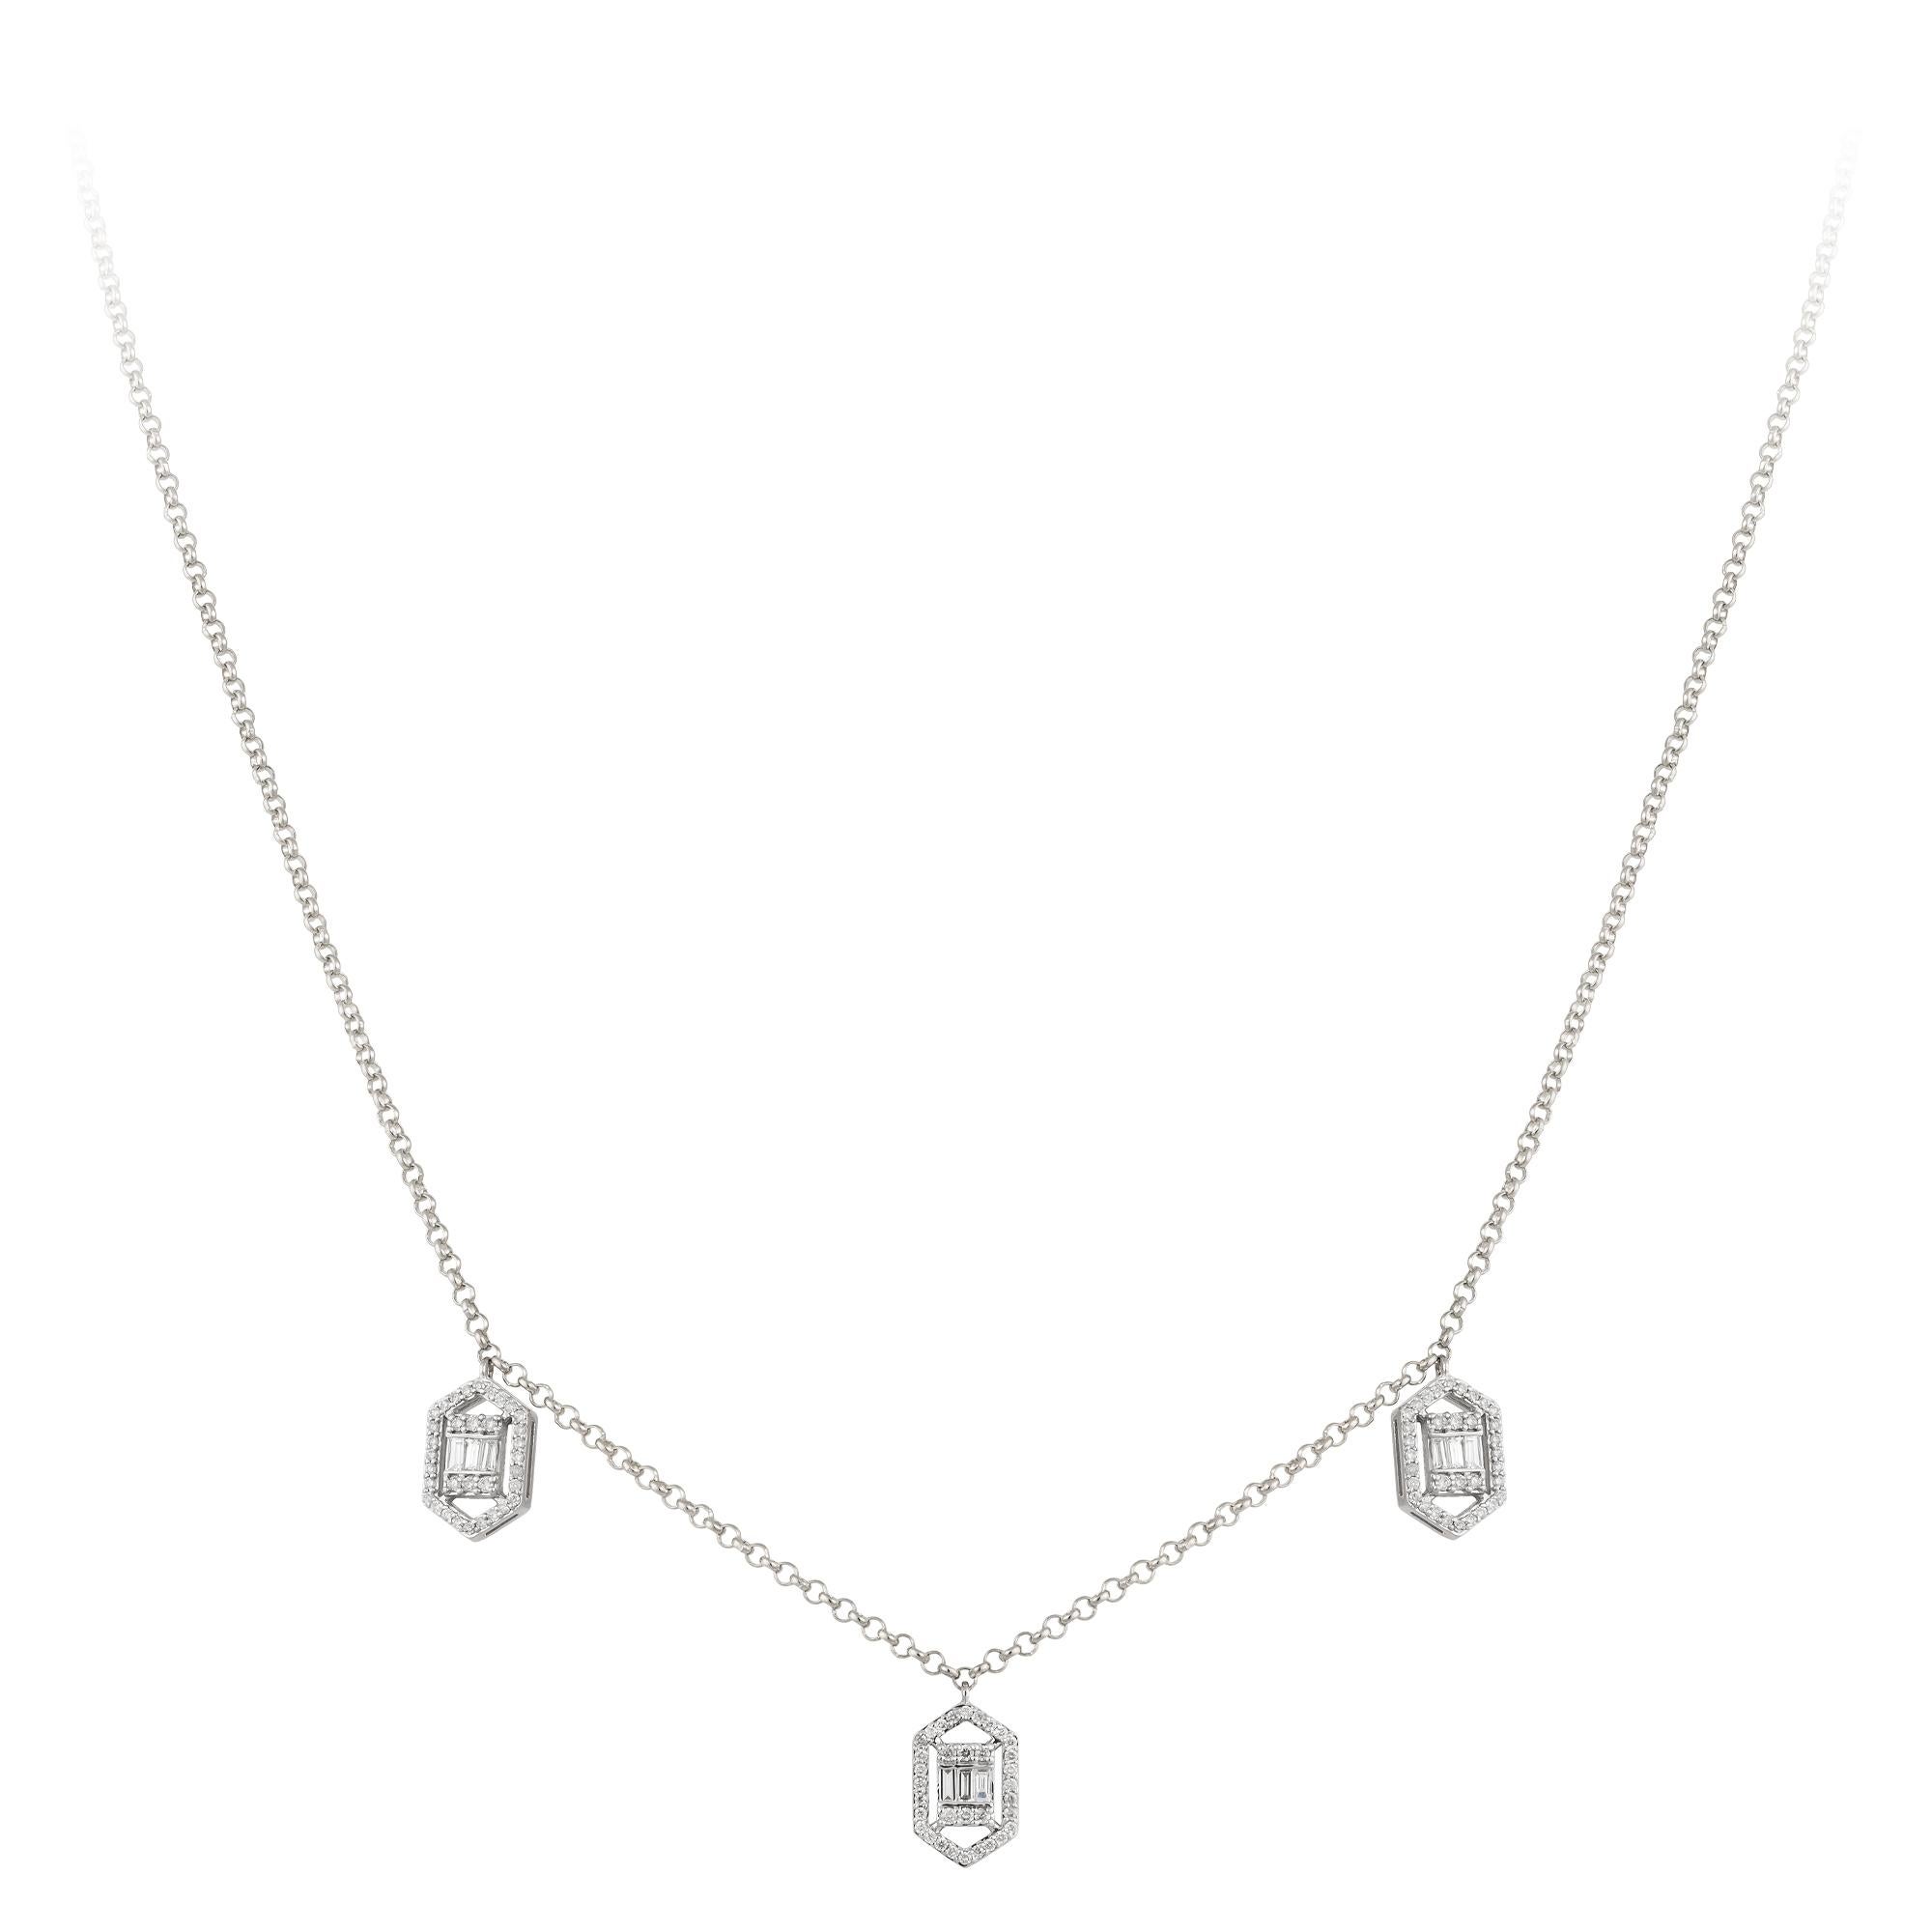 NECKLACE 18K White/Yellow Gold Diamond 0.38 Cts/102 Pcs Tapered Baguette 0.23 Cts/9 Pcs